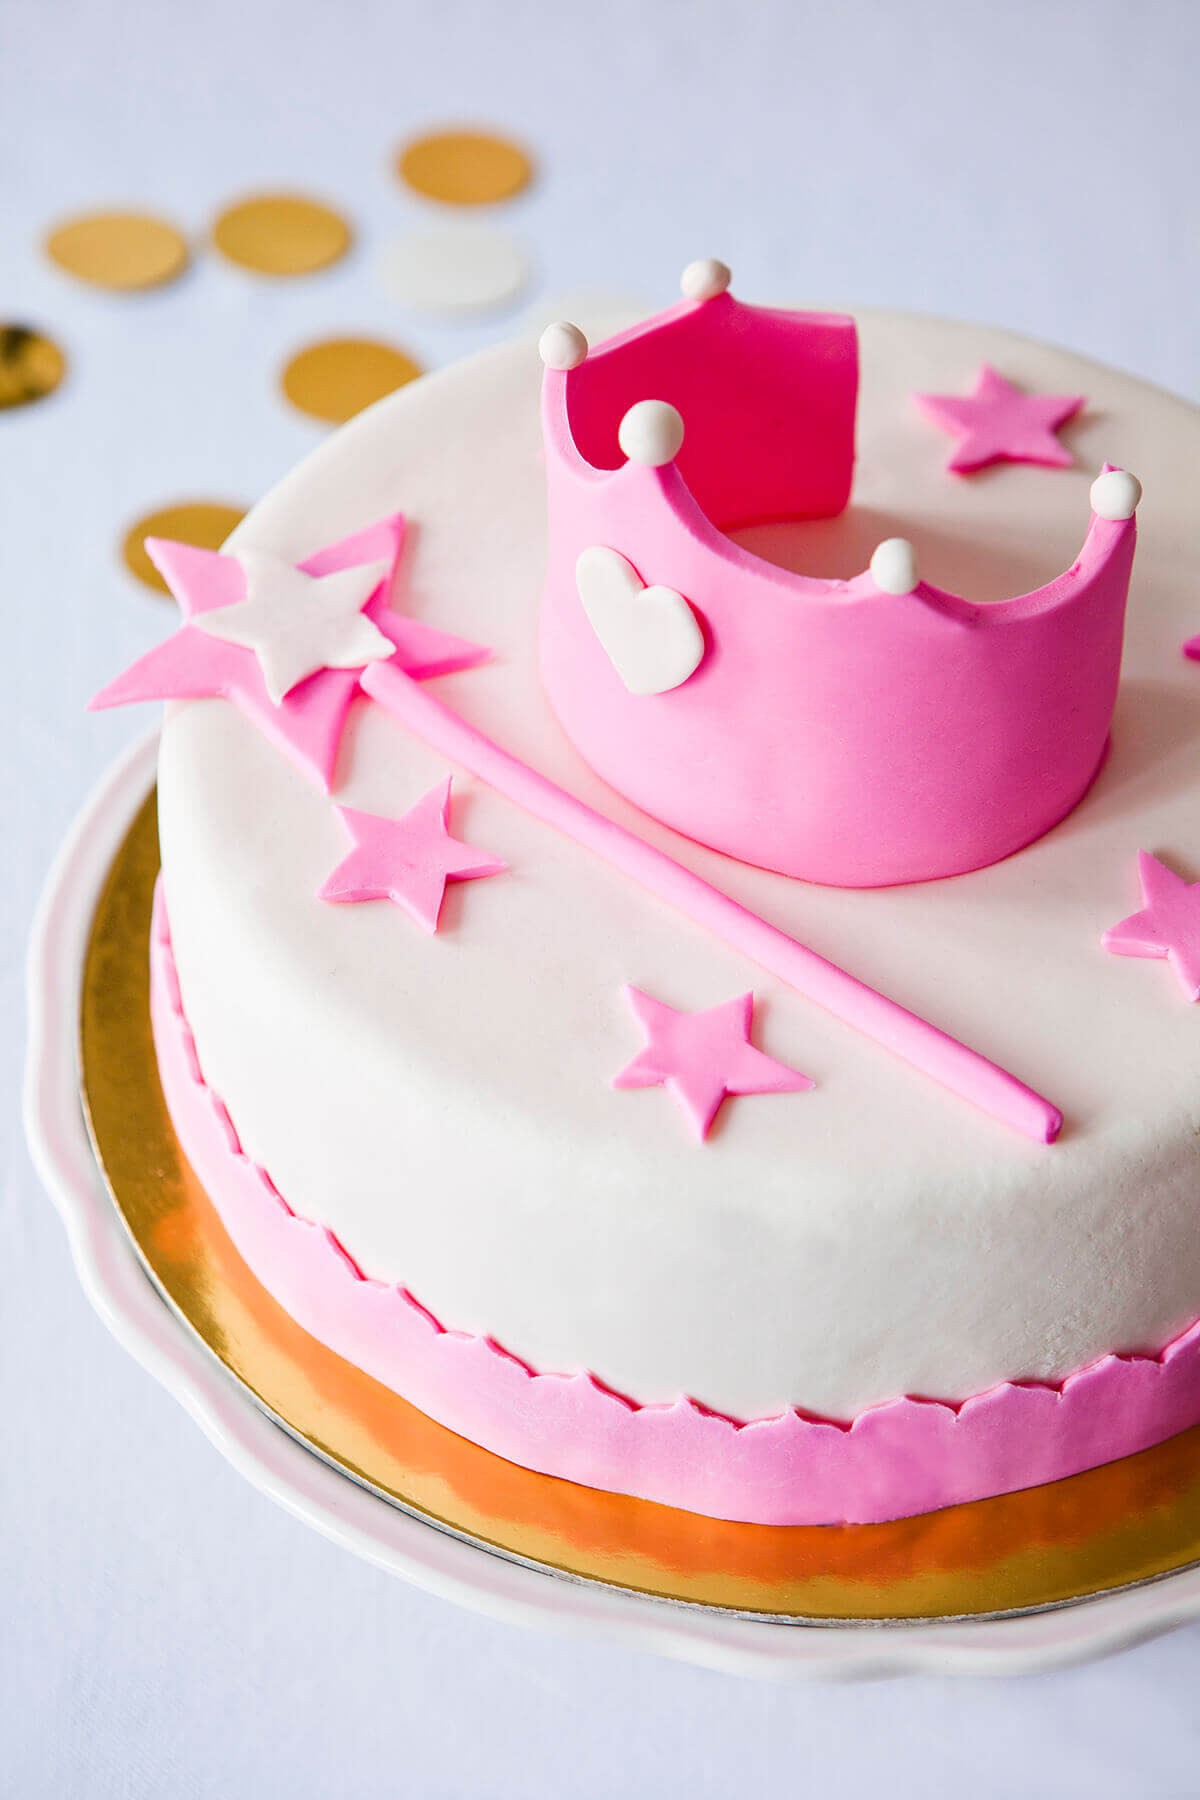 Pictures Of Birthday Cakes
 PRINCESS CAKE